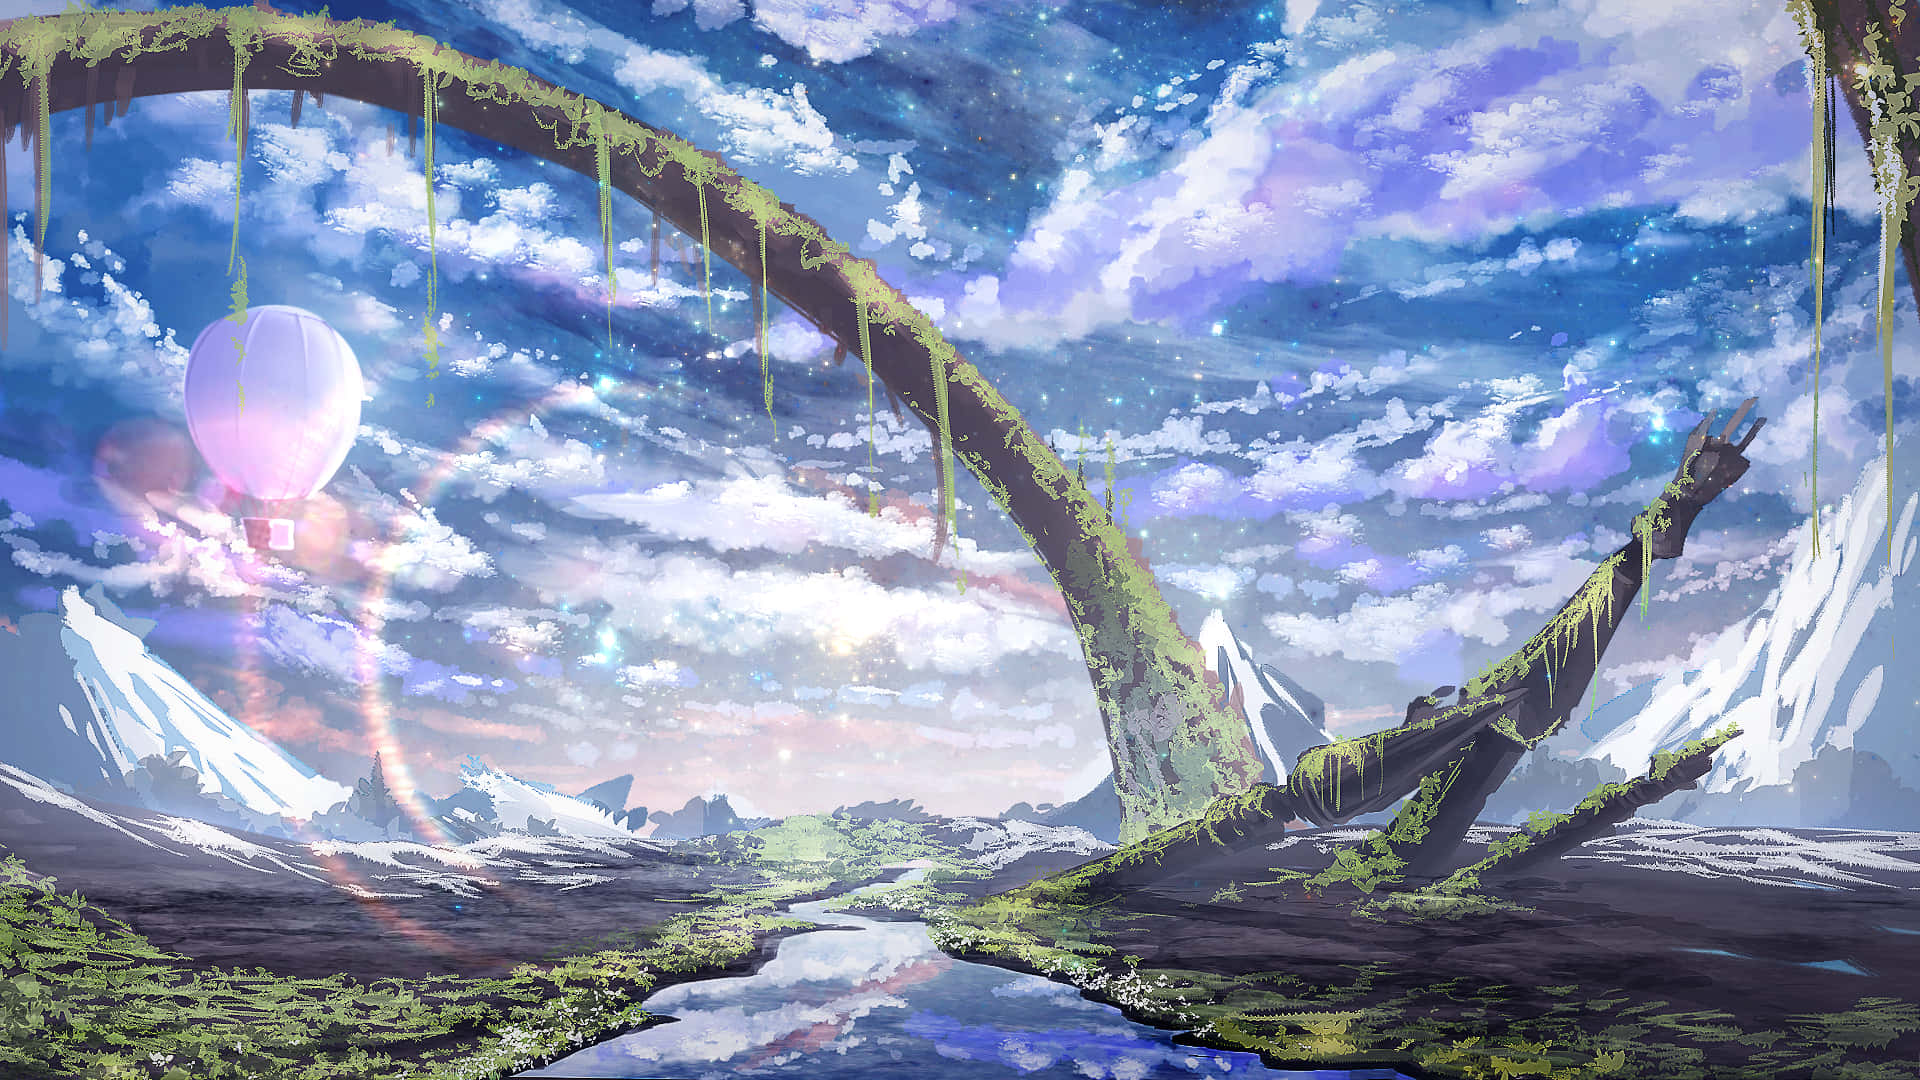 A peaceful journey through a beautiful anime-inspired world Wallpaper